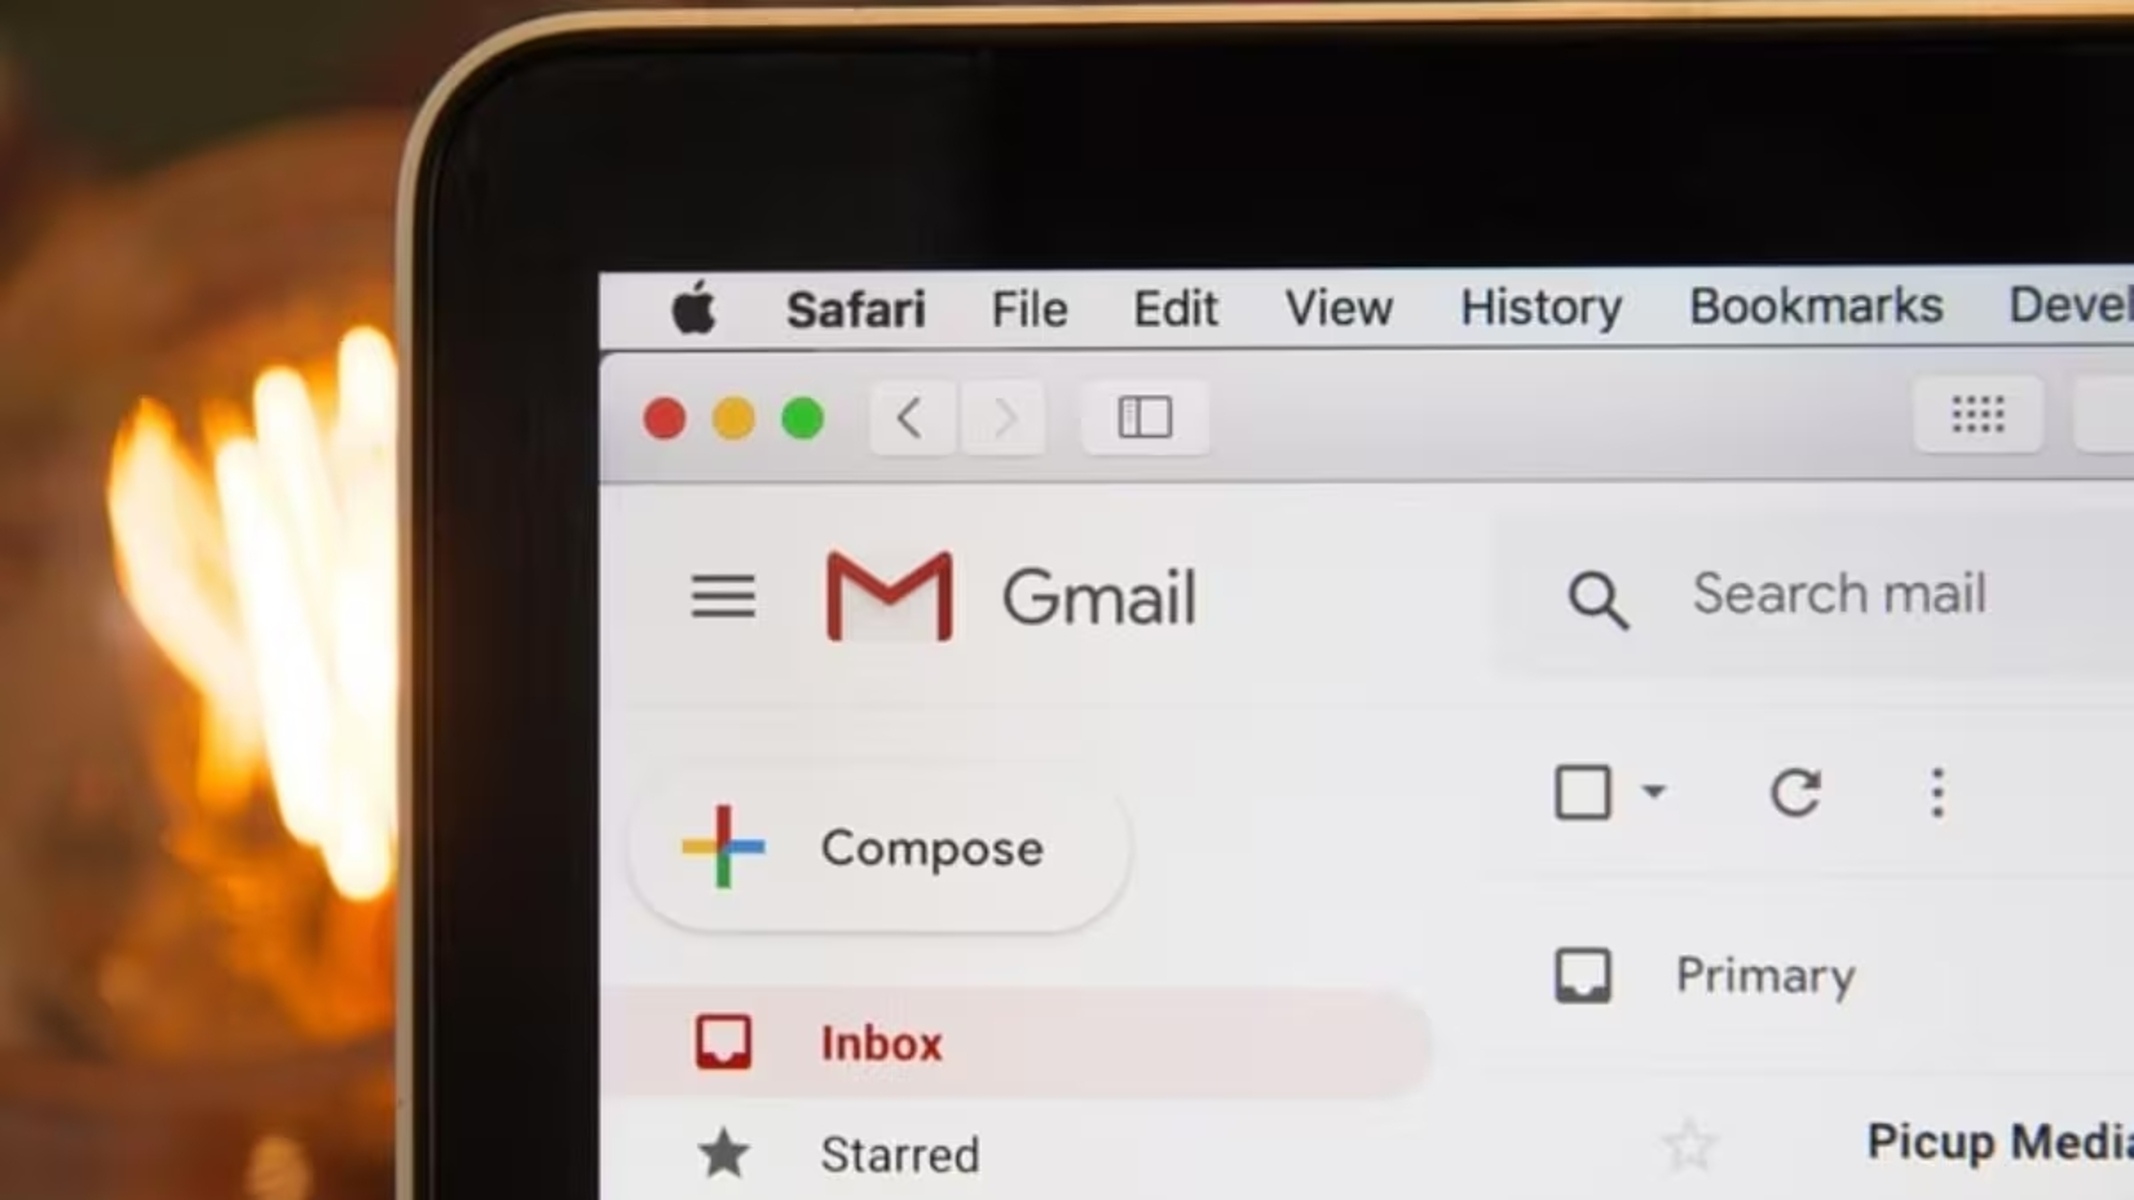 How To Add An Email Address To Your Gmail Contacts